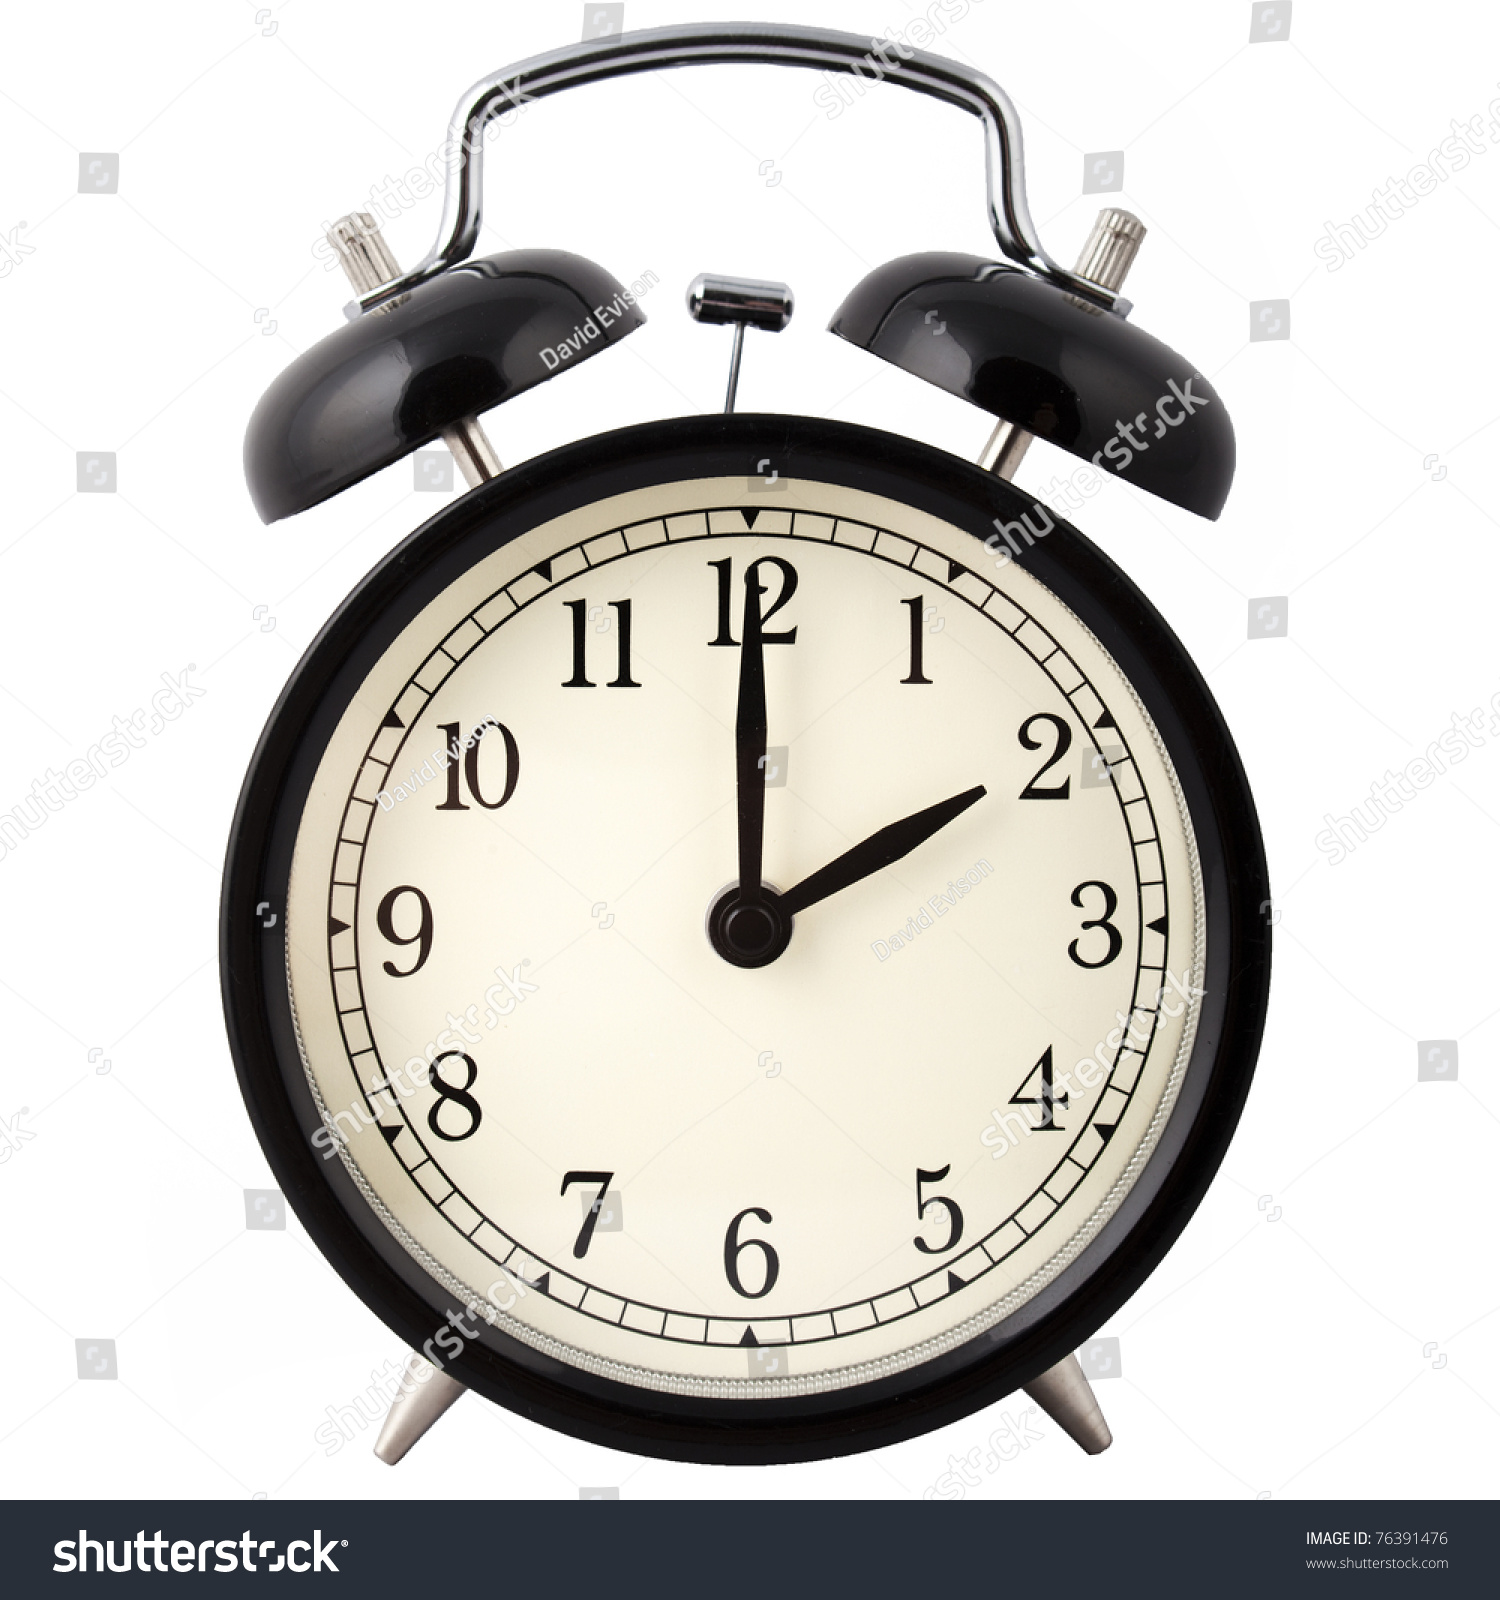 clipart two o'clock - photo #27